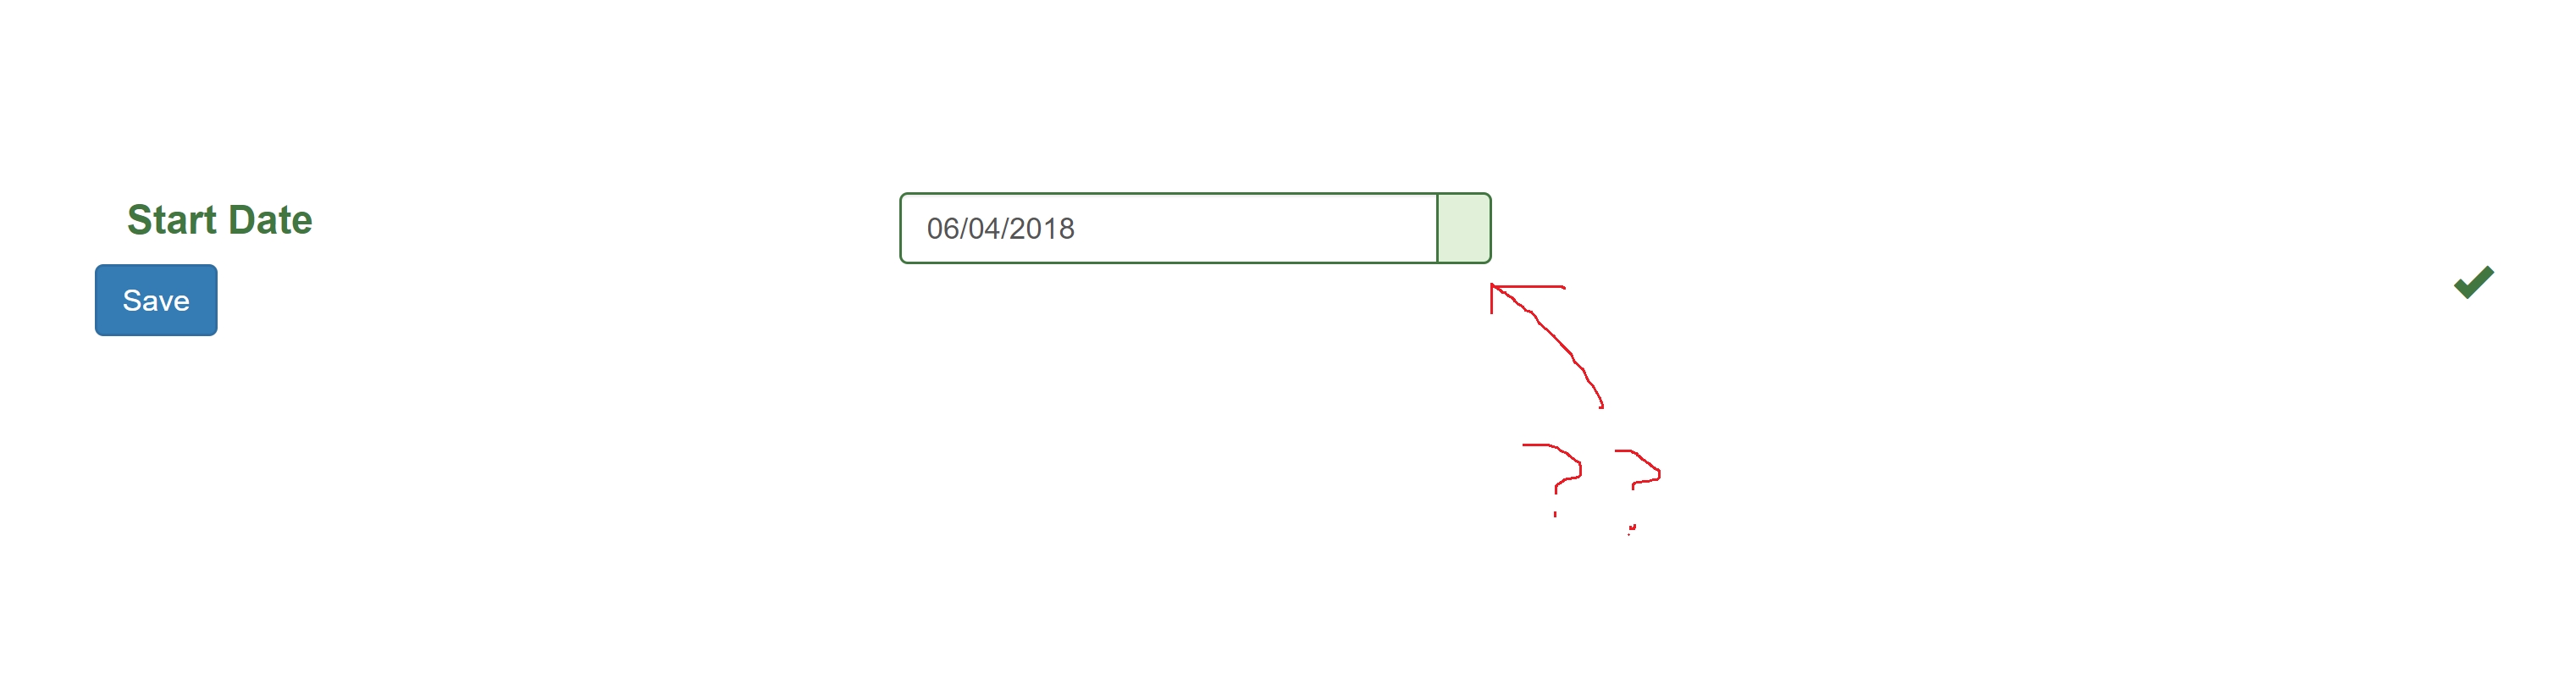 Jquery Date-Picker Glyphicon Icon Missing - Stack Overflow Jquery Calendar Icon Not Showing